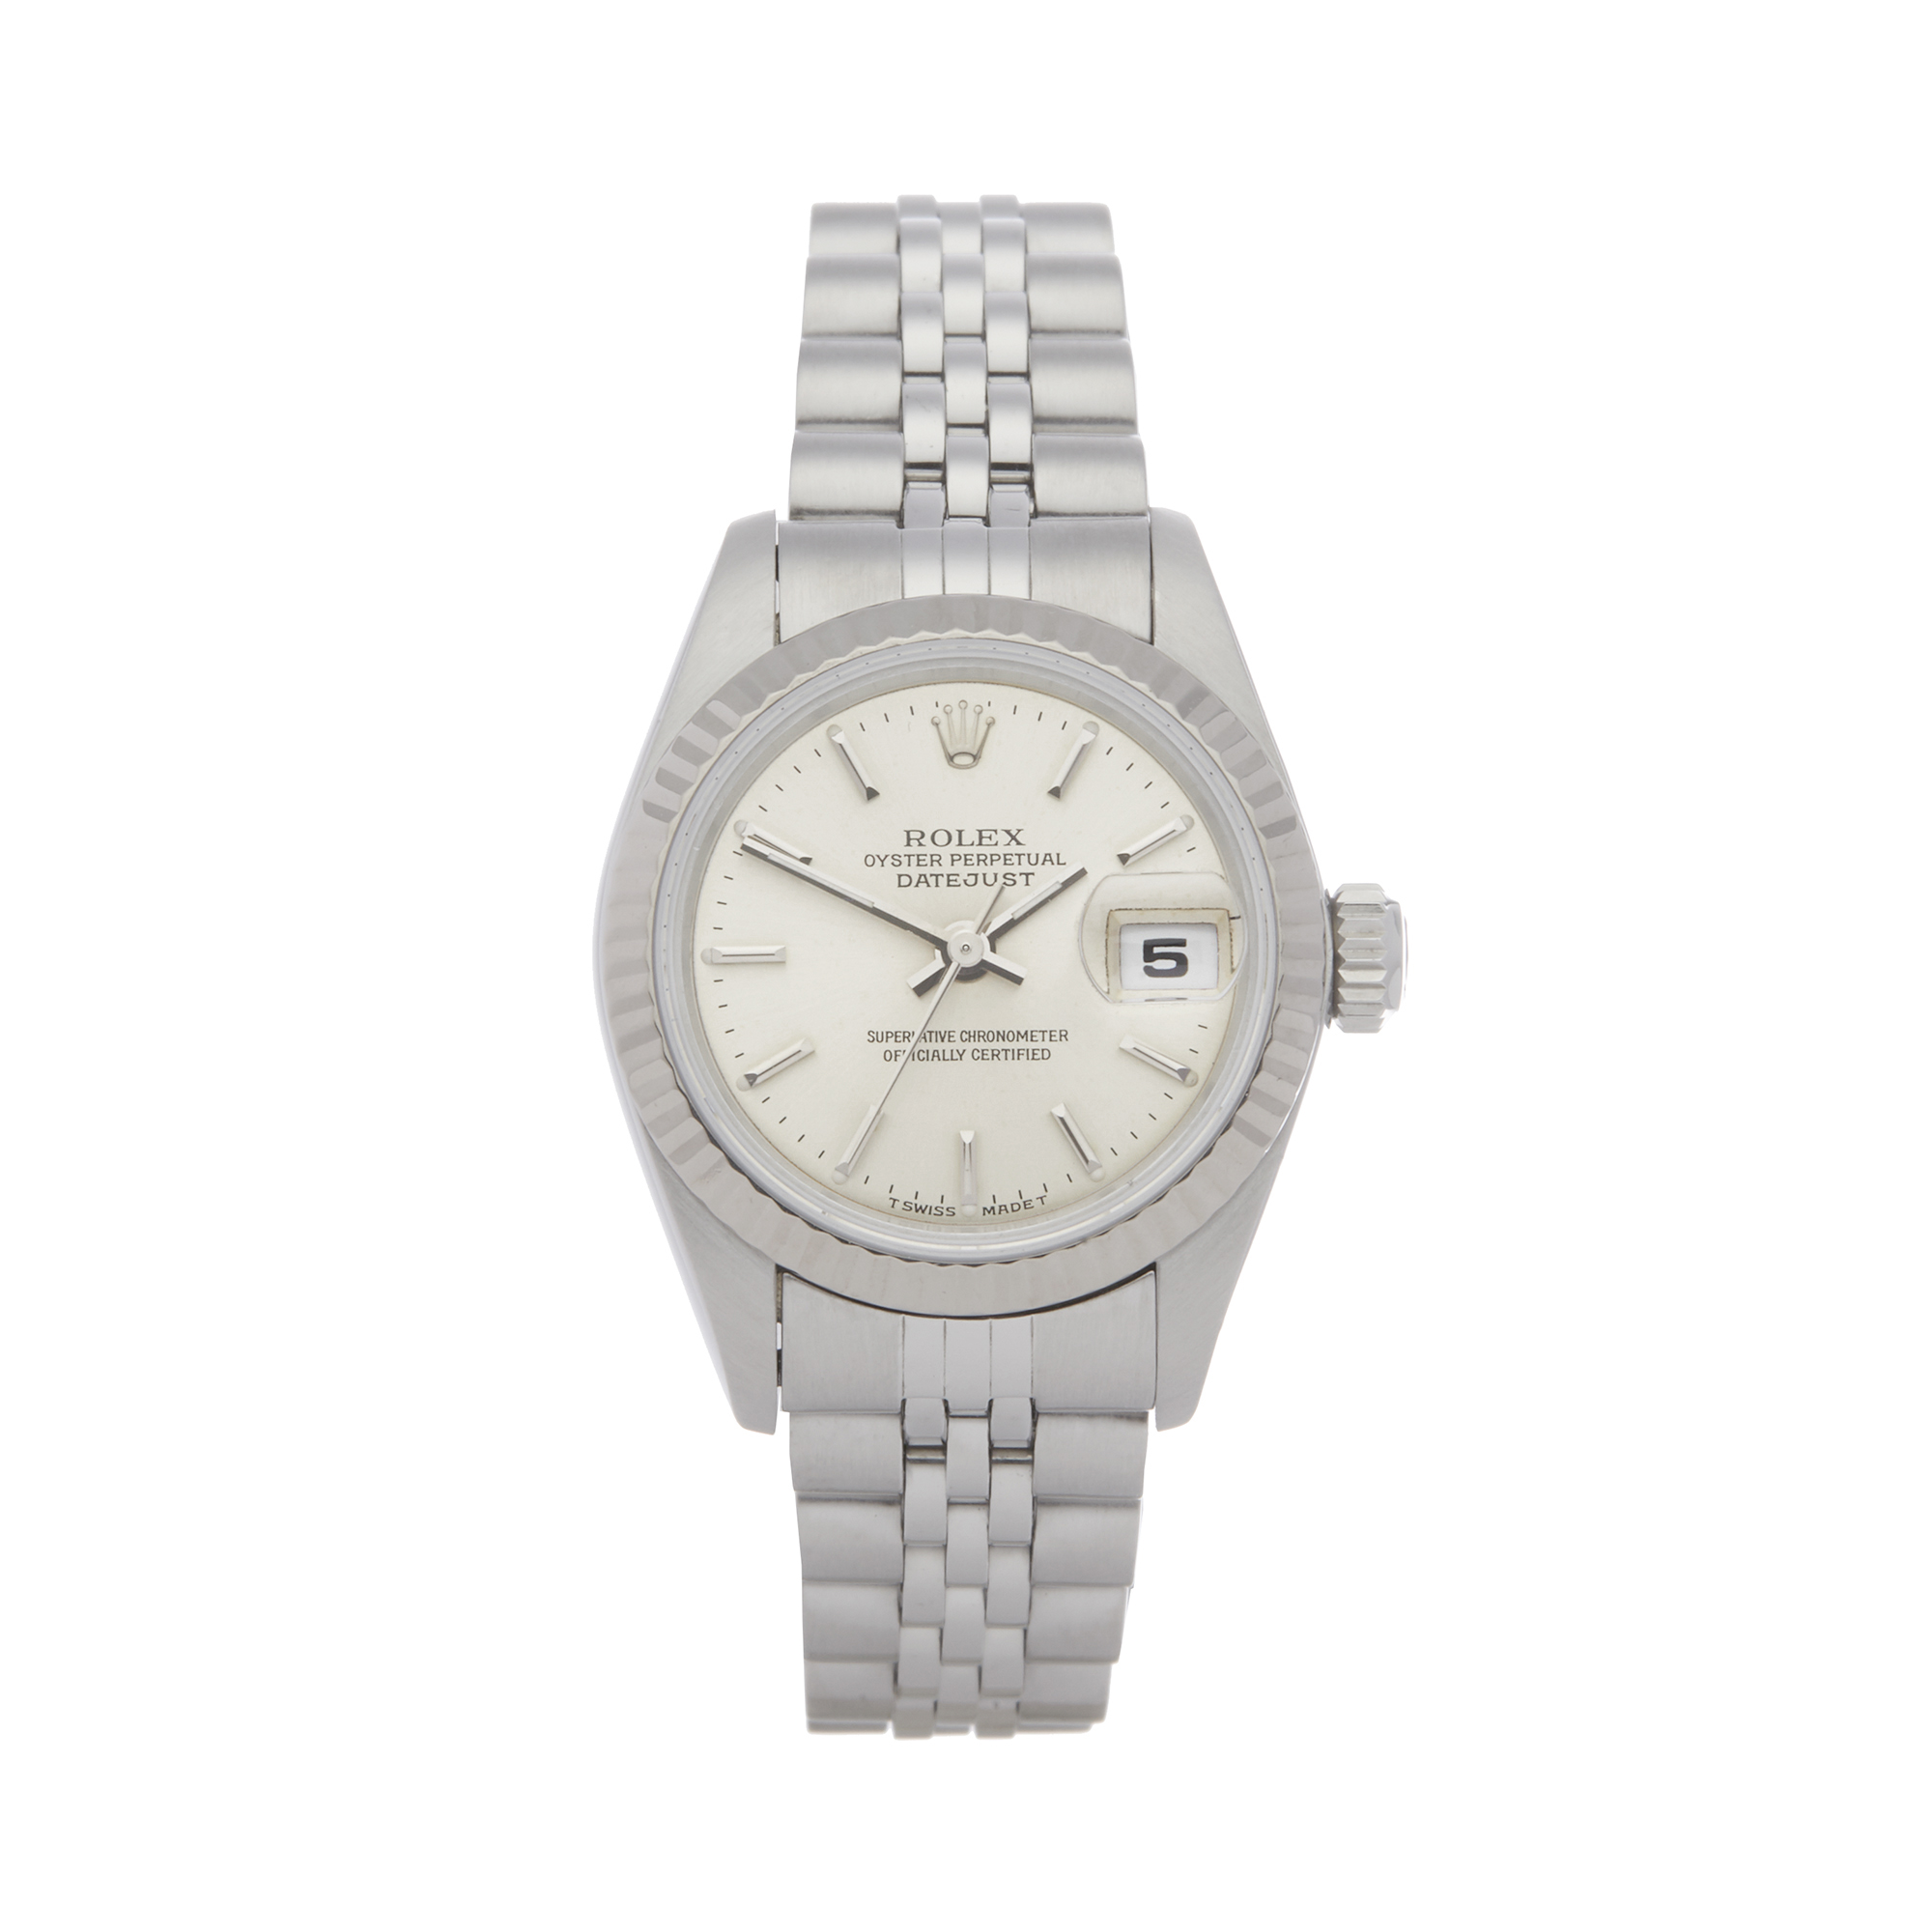 Rolex Datejust 26 69174 Ladies Stainless Steel Watch - Image 8 of 8